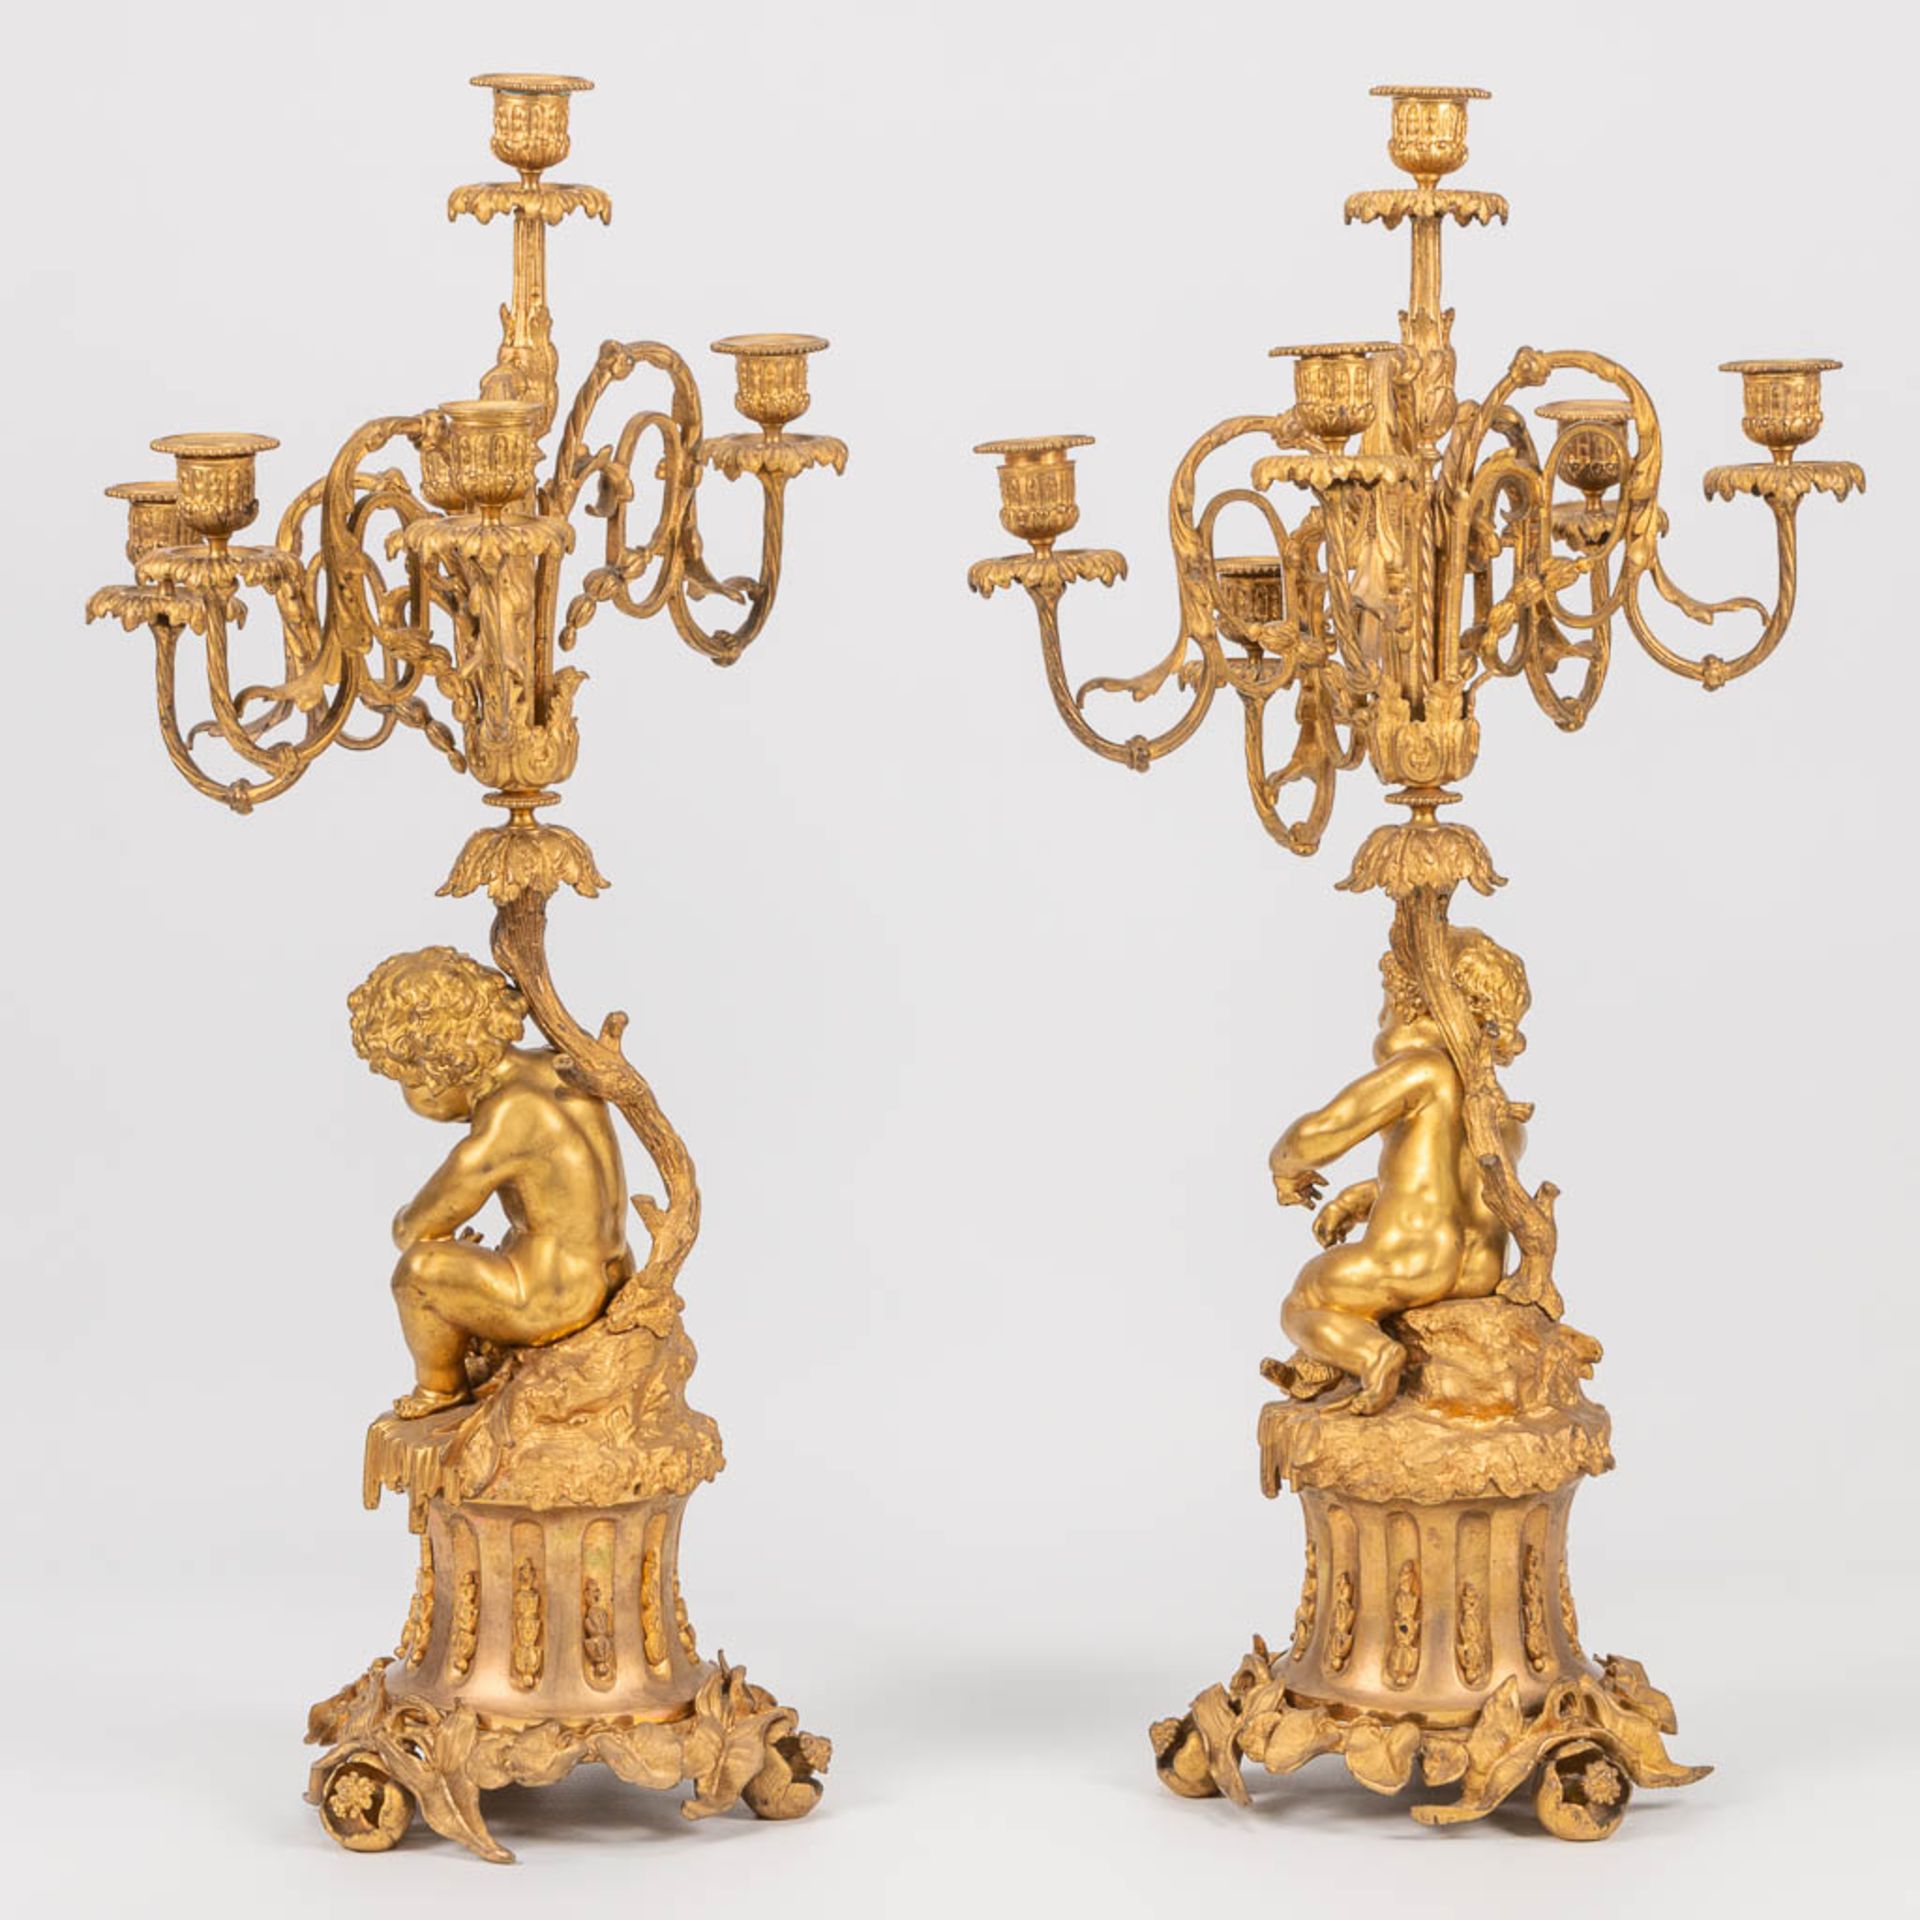 A pair of neoclassical candelabra decorated with putti, playing with pets. 19th century. (30 x 33 x  - Bild 4 aus 17